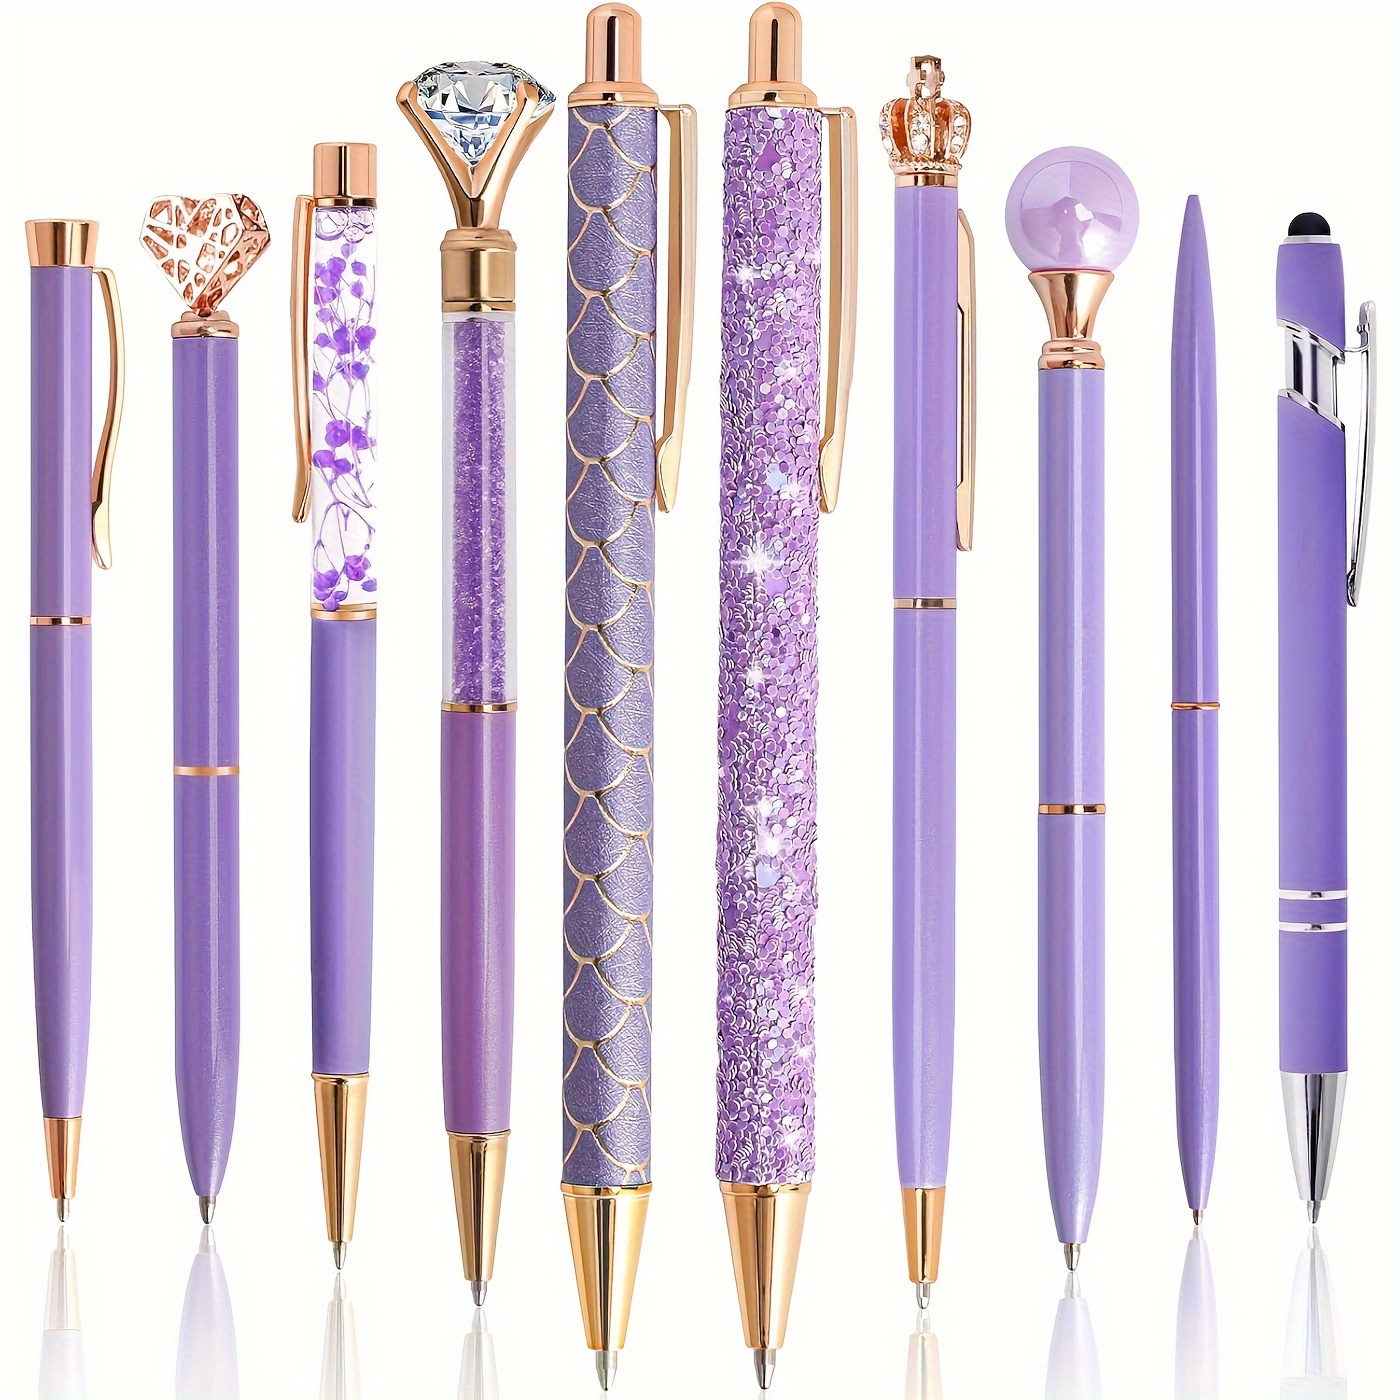 

Elegant 10-piece Purple Ballpoint Pen Set For Women - Quick-dry Ink, Retractable Metal Crystal Pens, Perfect For Office & School Supplies, Ideal Gift For Her